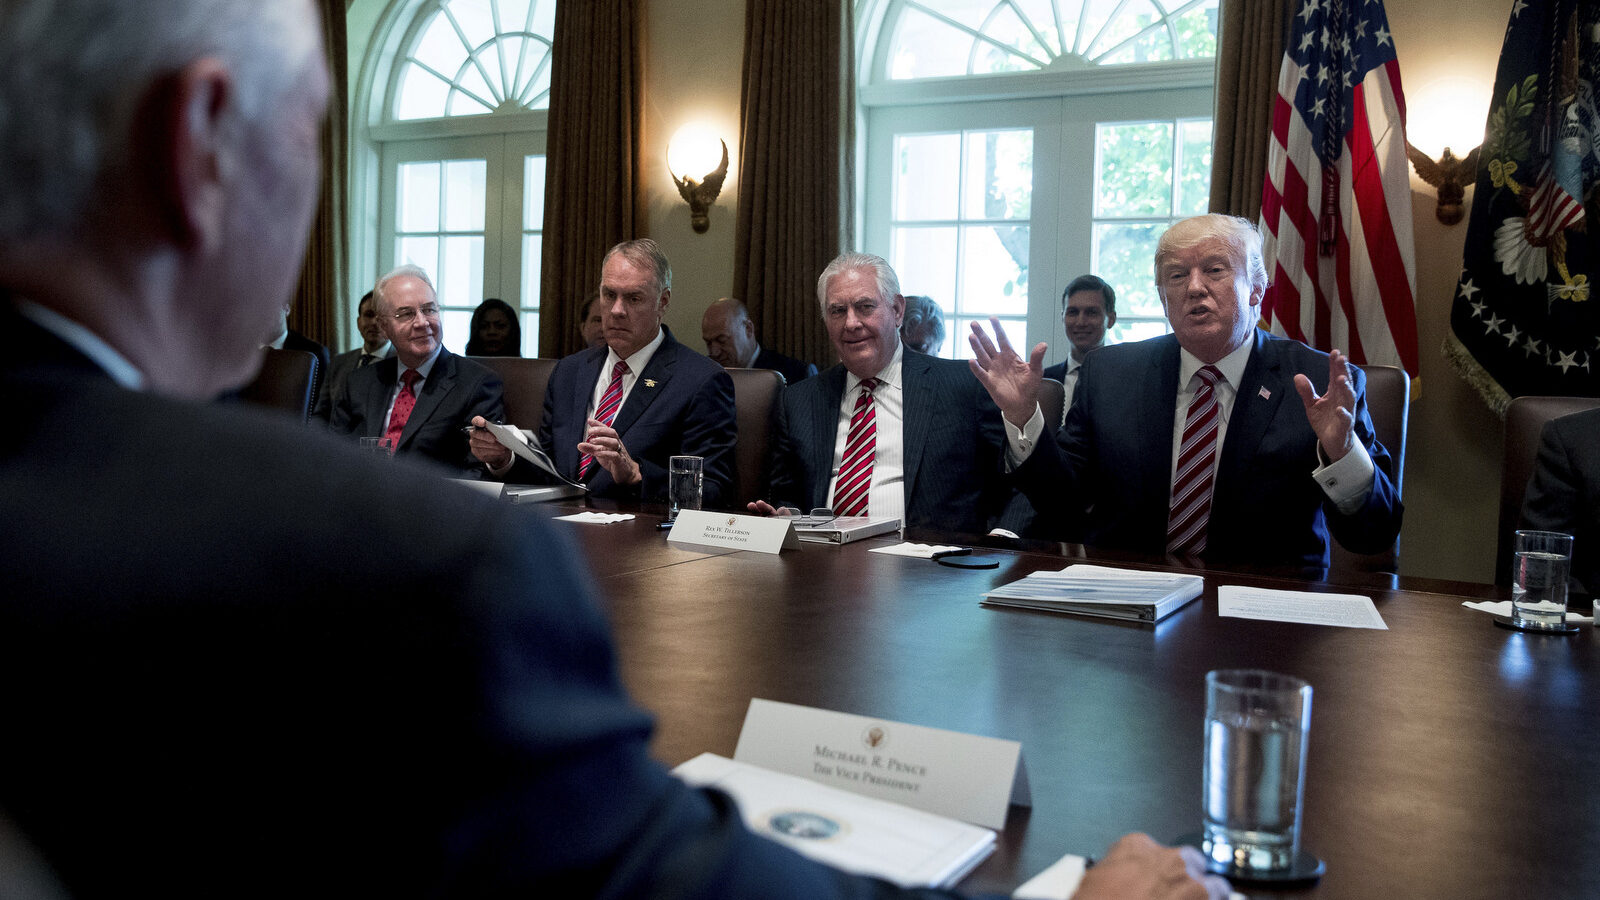 Flanked by former Exxon executive, now Secretary of State Rex Tillerson, President Donald Trump speaks during a cabinet meeting., June 12, 2017. (AP/Andrew Harnik)